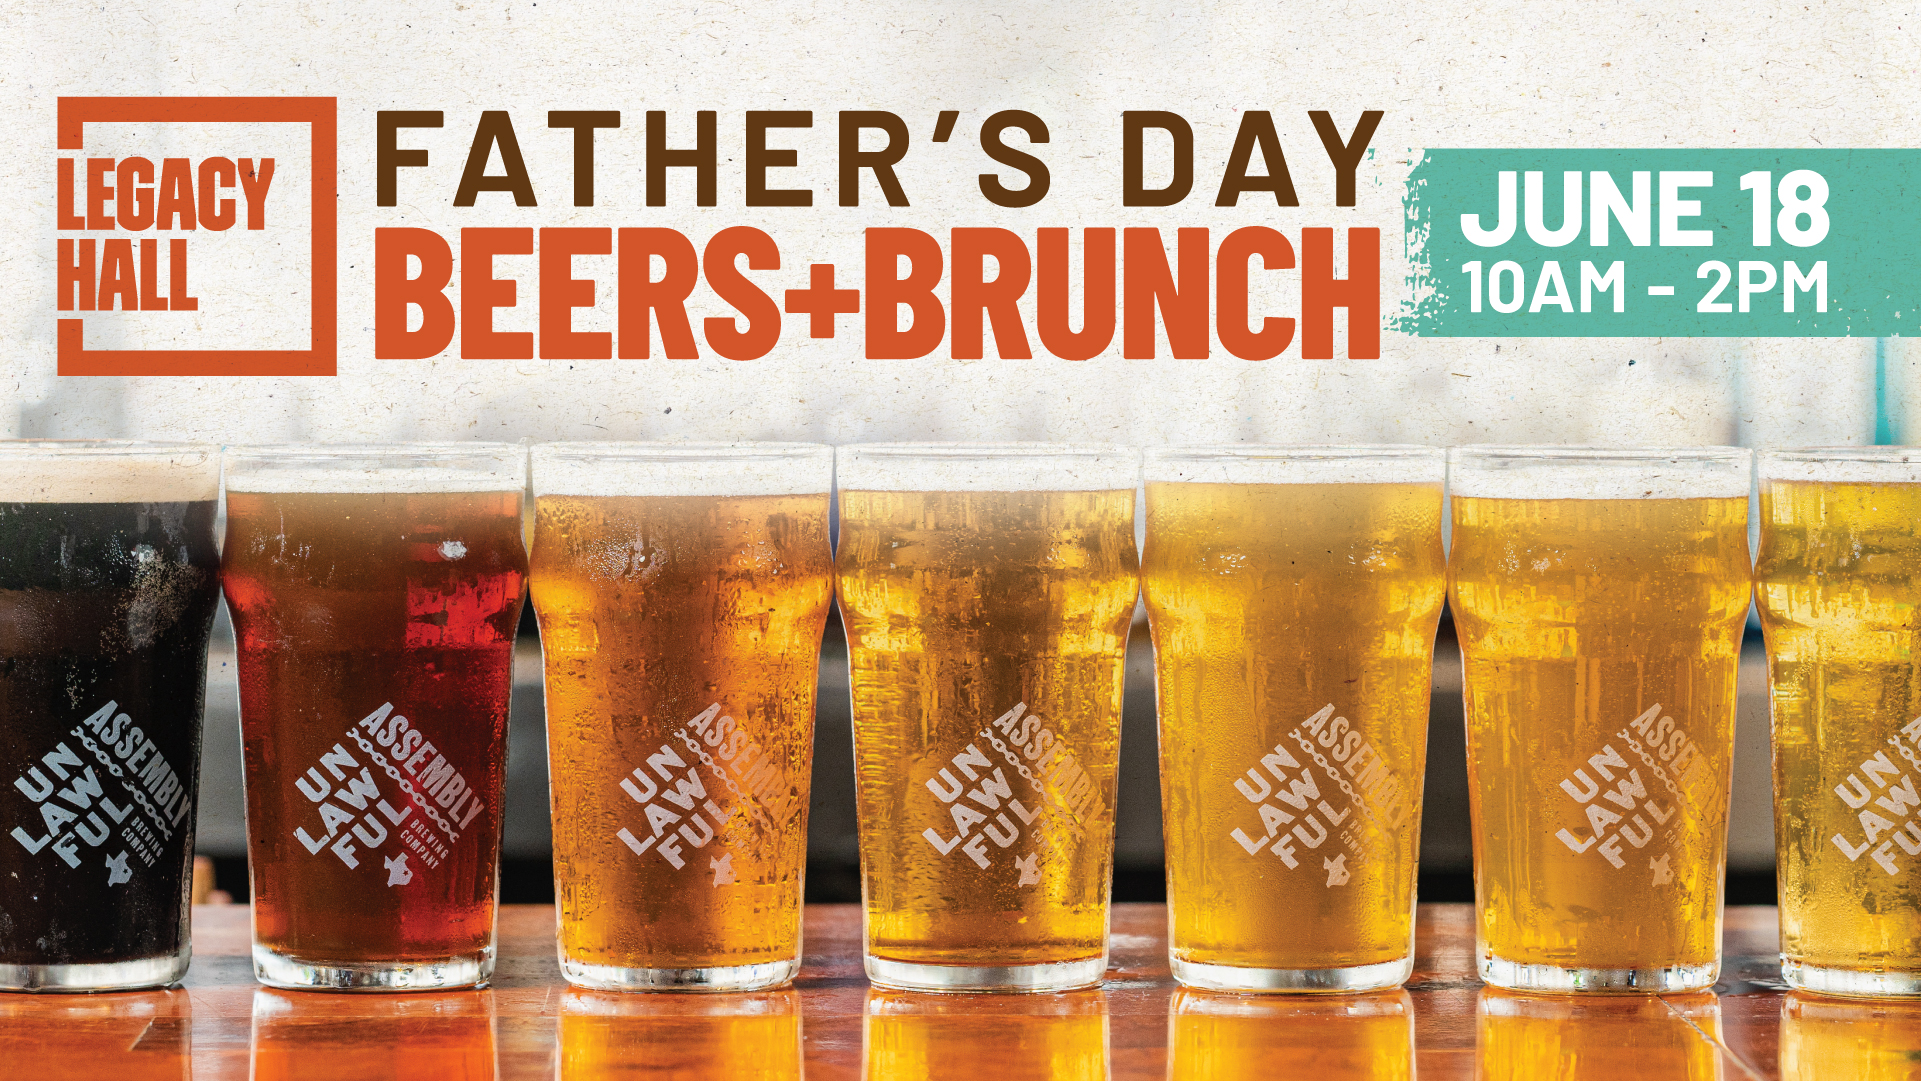 Promo image of Father’s Day Beers + Brunch